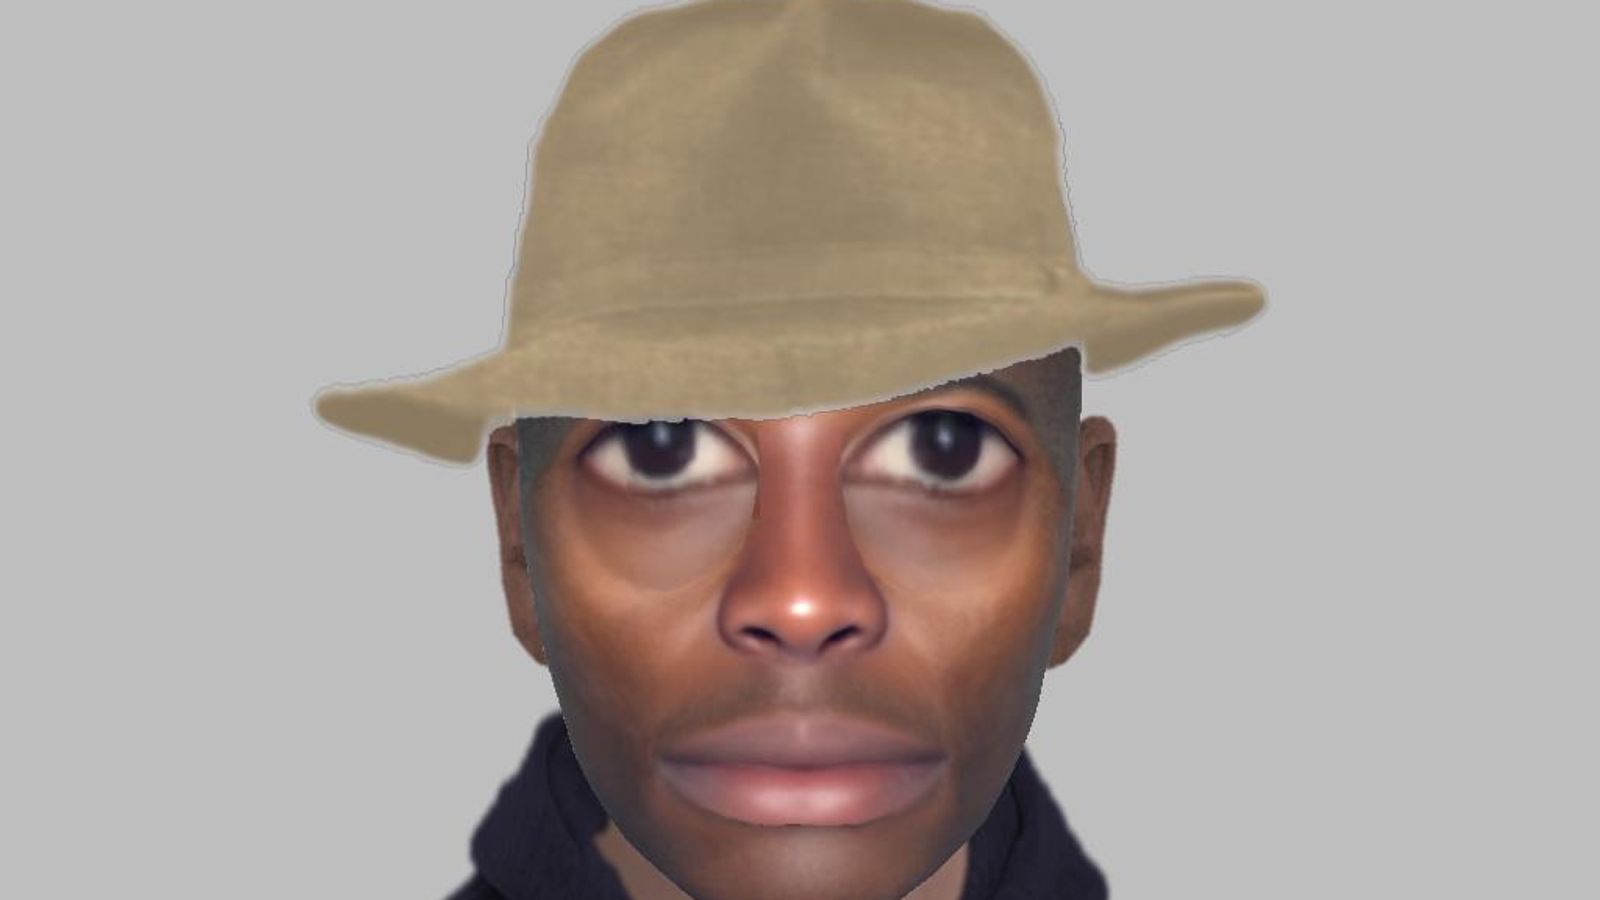 Police release e-fit after man targets woman on footpath in sex attack